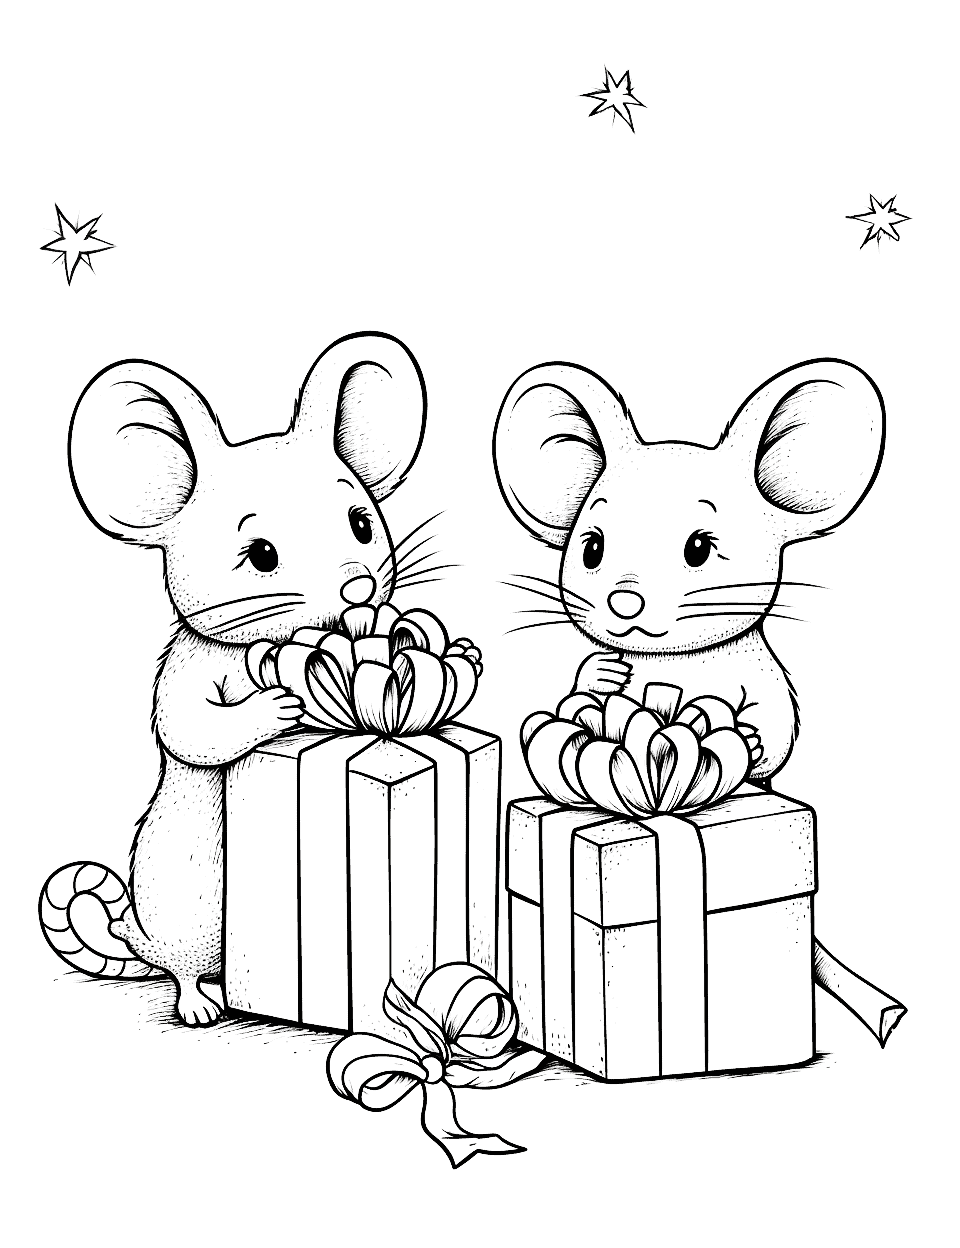 A Very Mice Christmas Coloring Page - Cute little mice exchanging cheese-shaped presents.